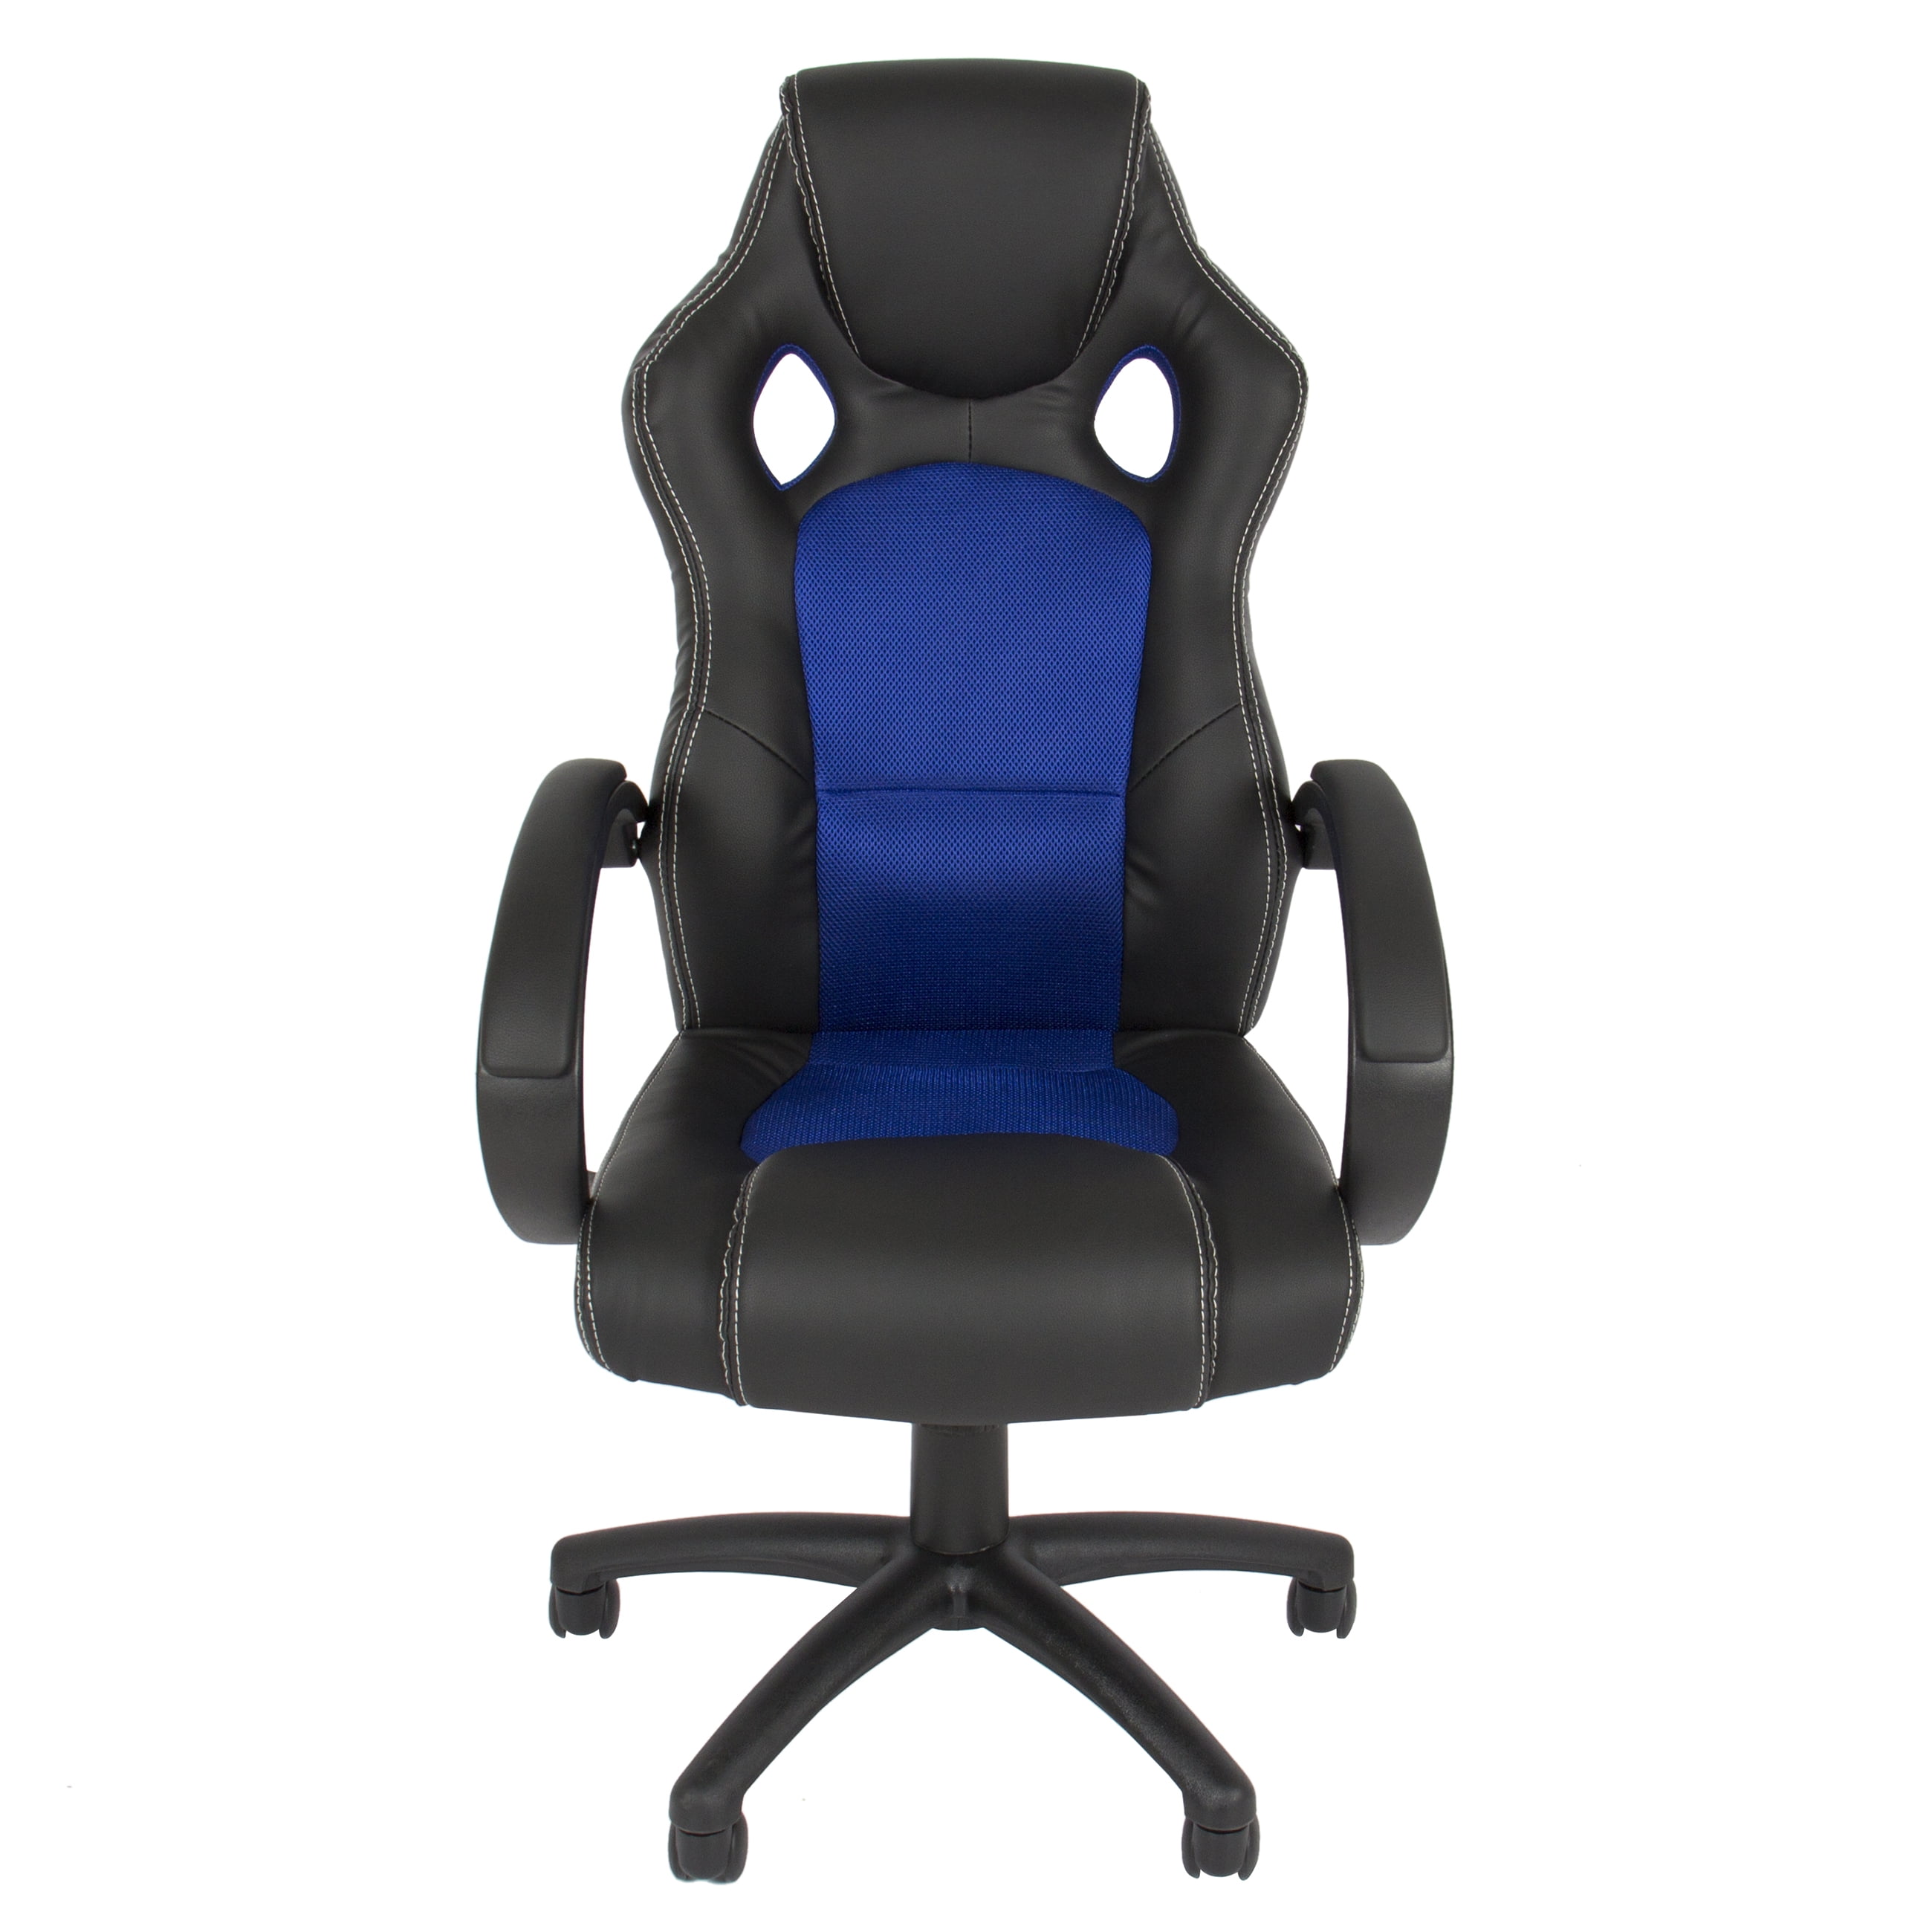 Executive Racing Gaming Office Chair PU Leather Swivel Computer